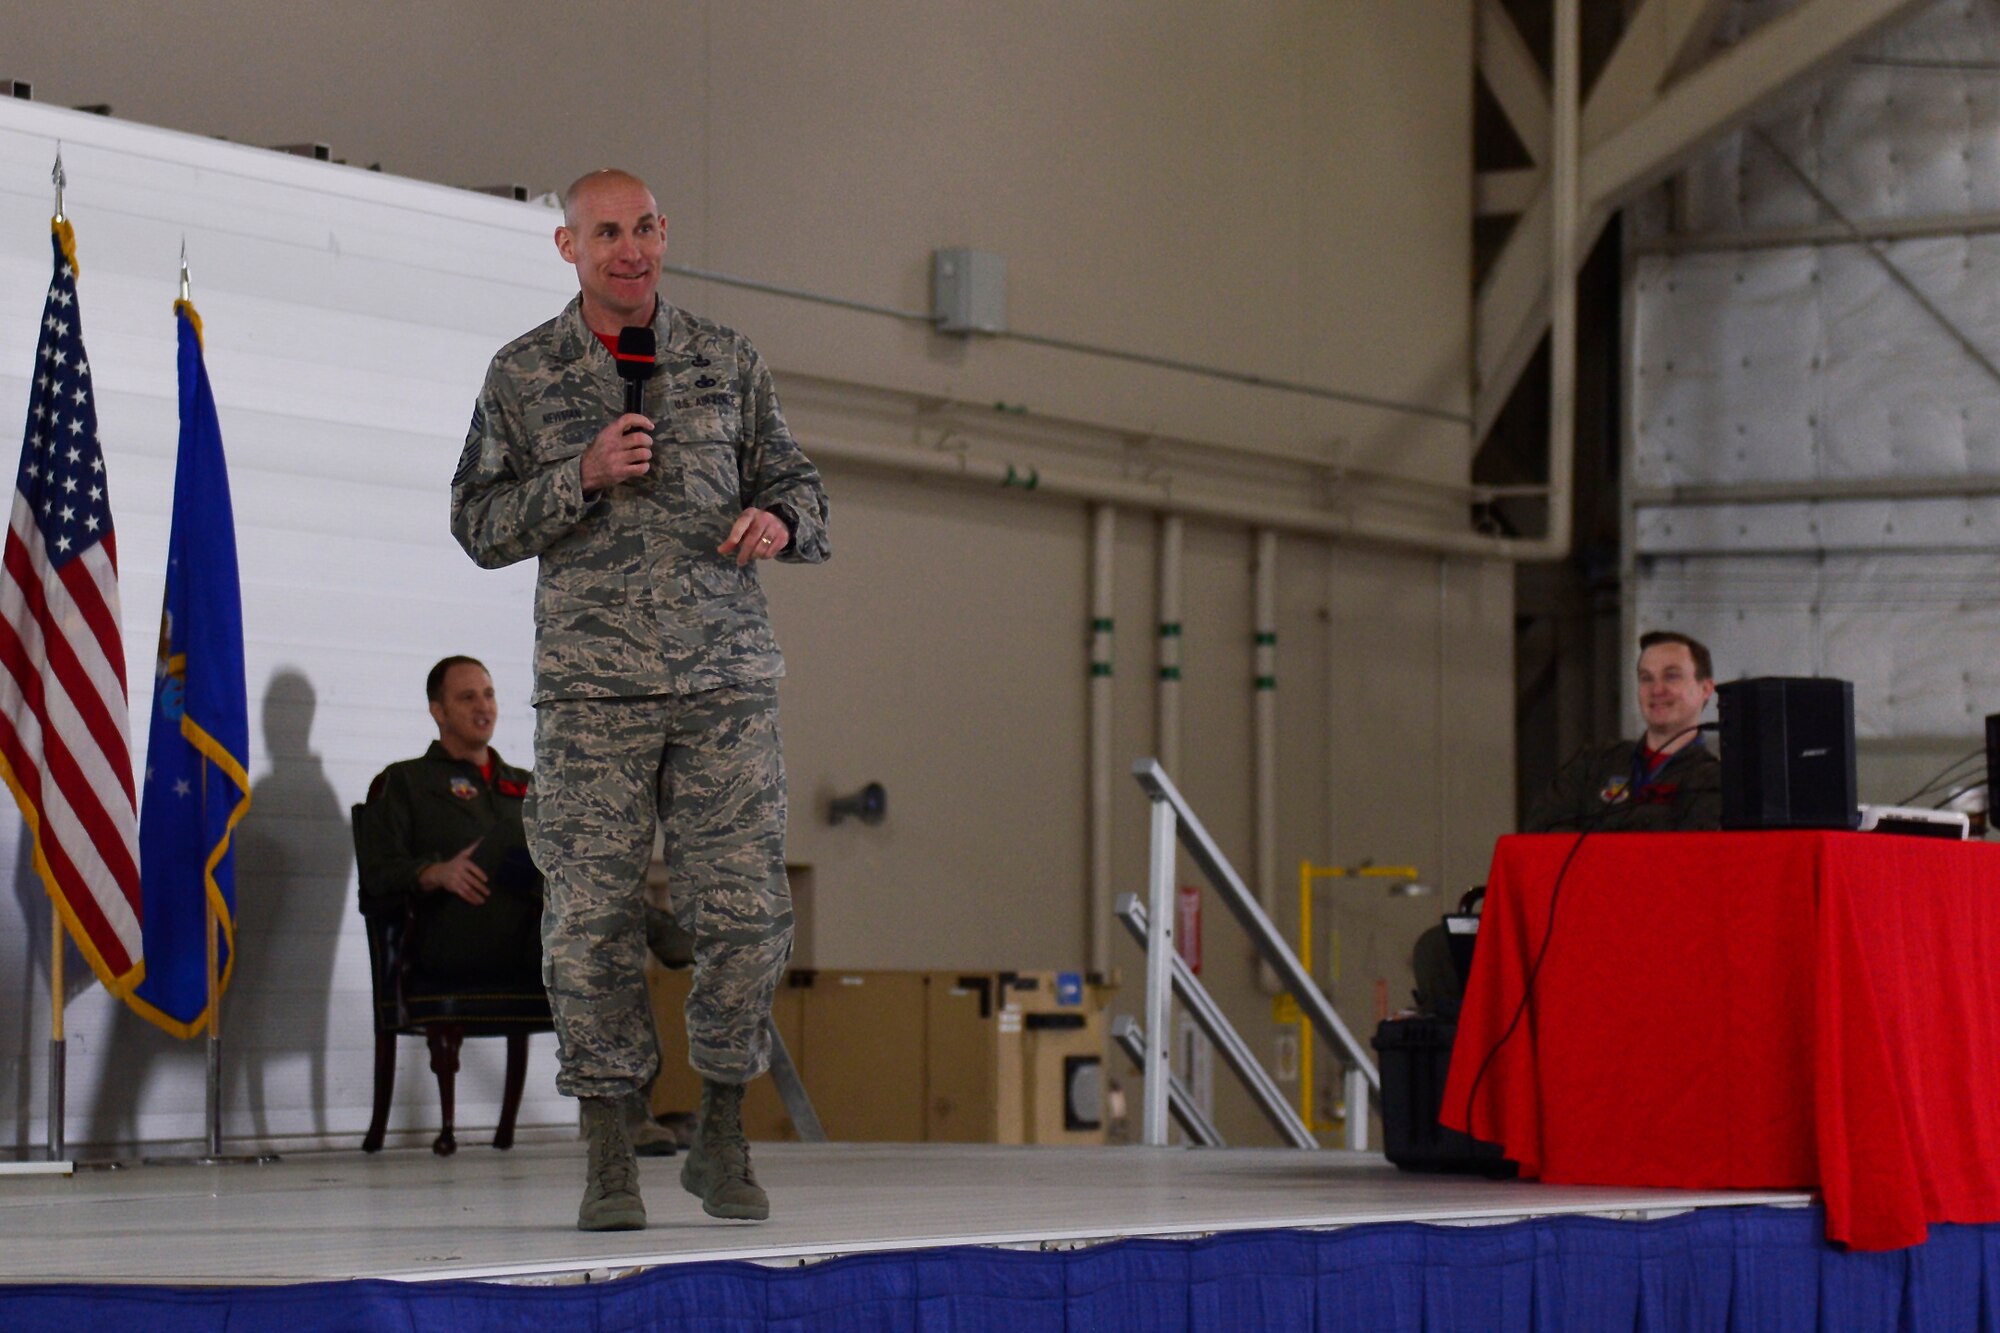 Chief Master Sgt. Jamie Newman, 432nd Wing/432nd Air Expeditionary Wing command chief, explains the importance of being a wingman to help prevent suicide during an all-call at Creech Air Force Base, Nevada, Mar. 8, 2019. Newman and Col. Julian Cheater, 432nd WG/432nd AEW commander, touched on a variety of topics ranging from reaching four million flight hours to supporting the Hunter family, career progression and training. (U.S. Air Force photo by Tech. Sgt. Dillon White)